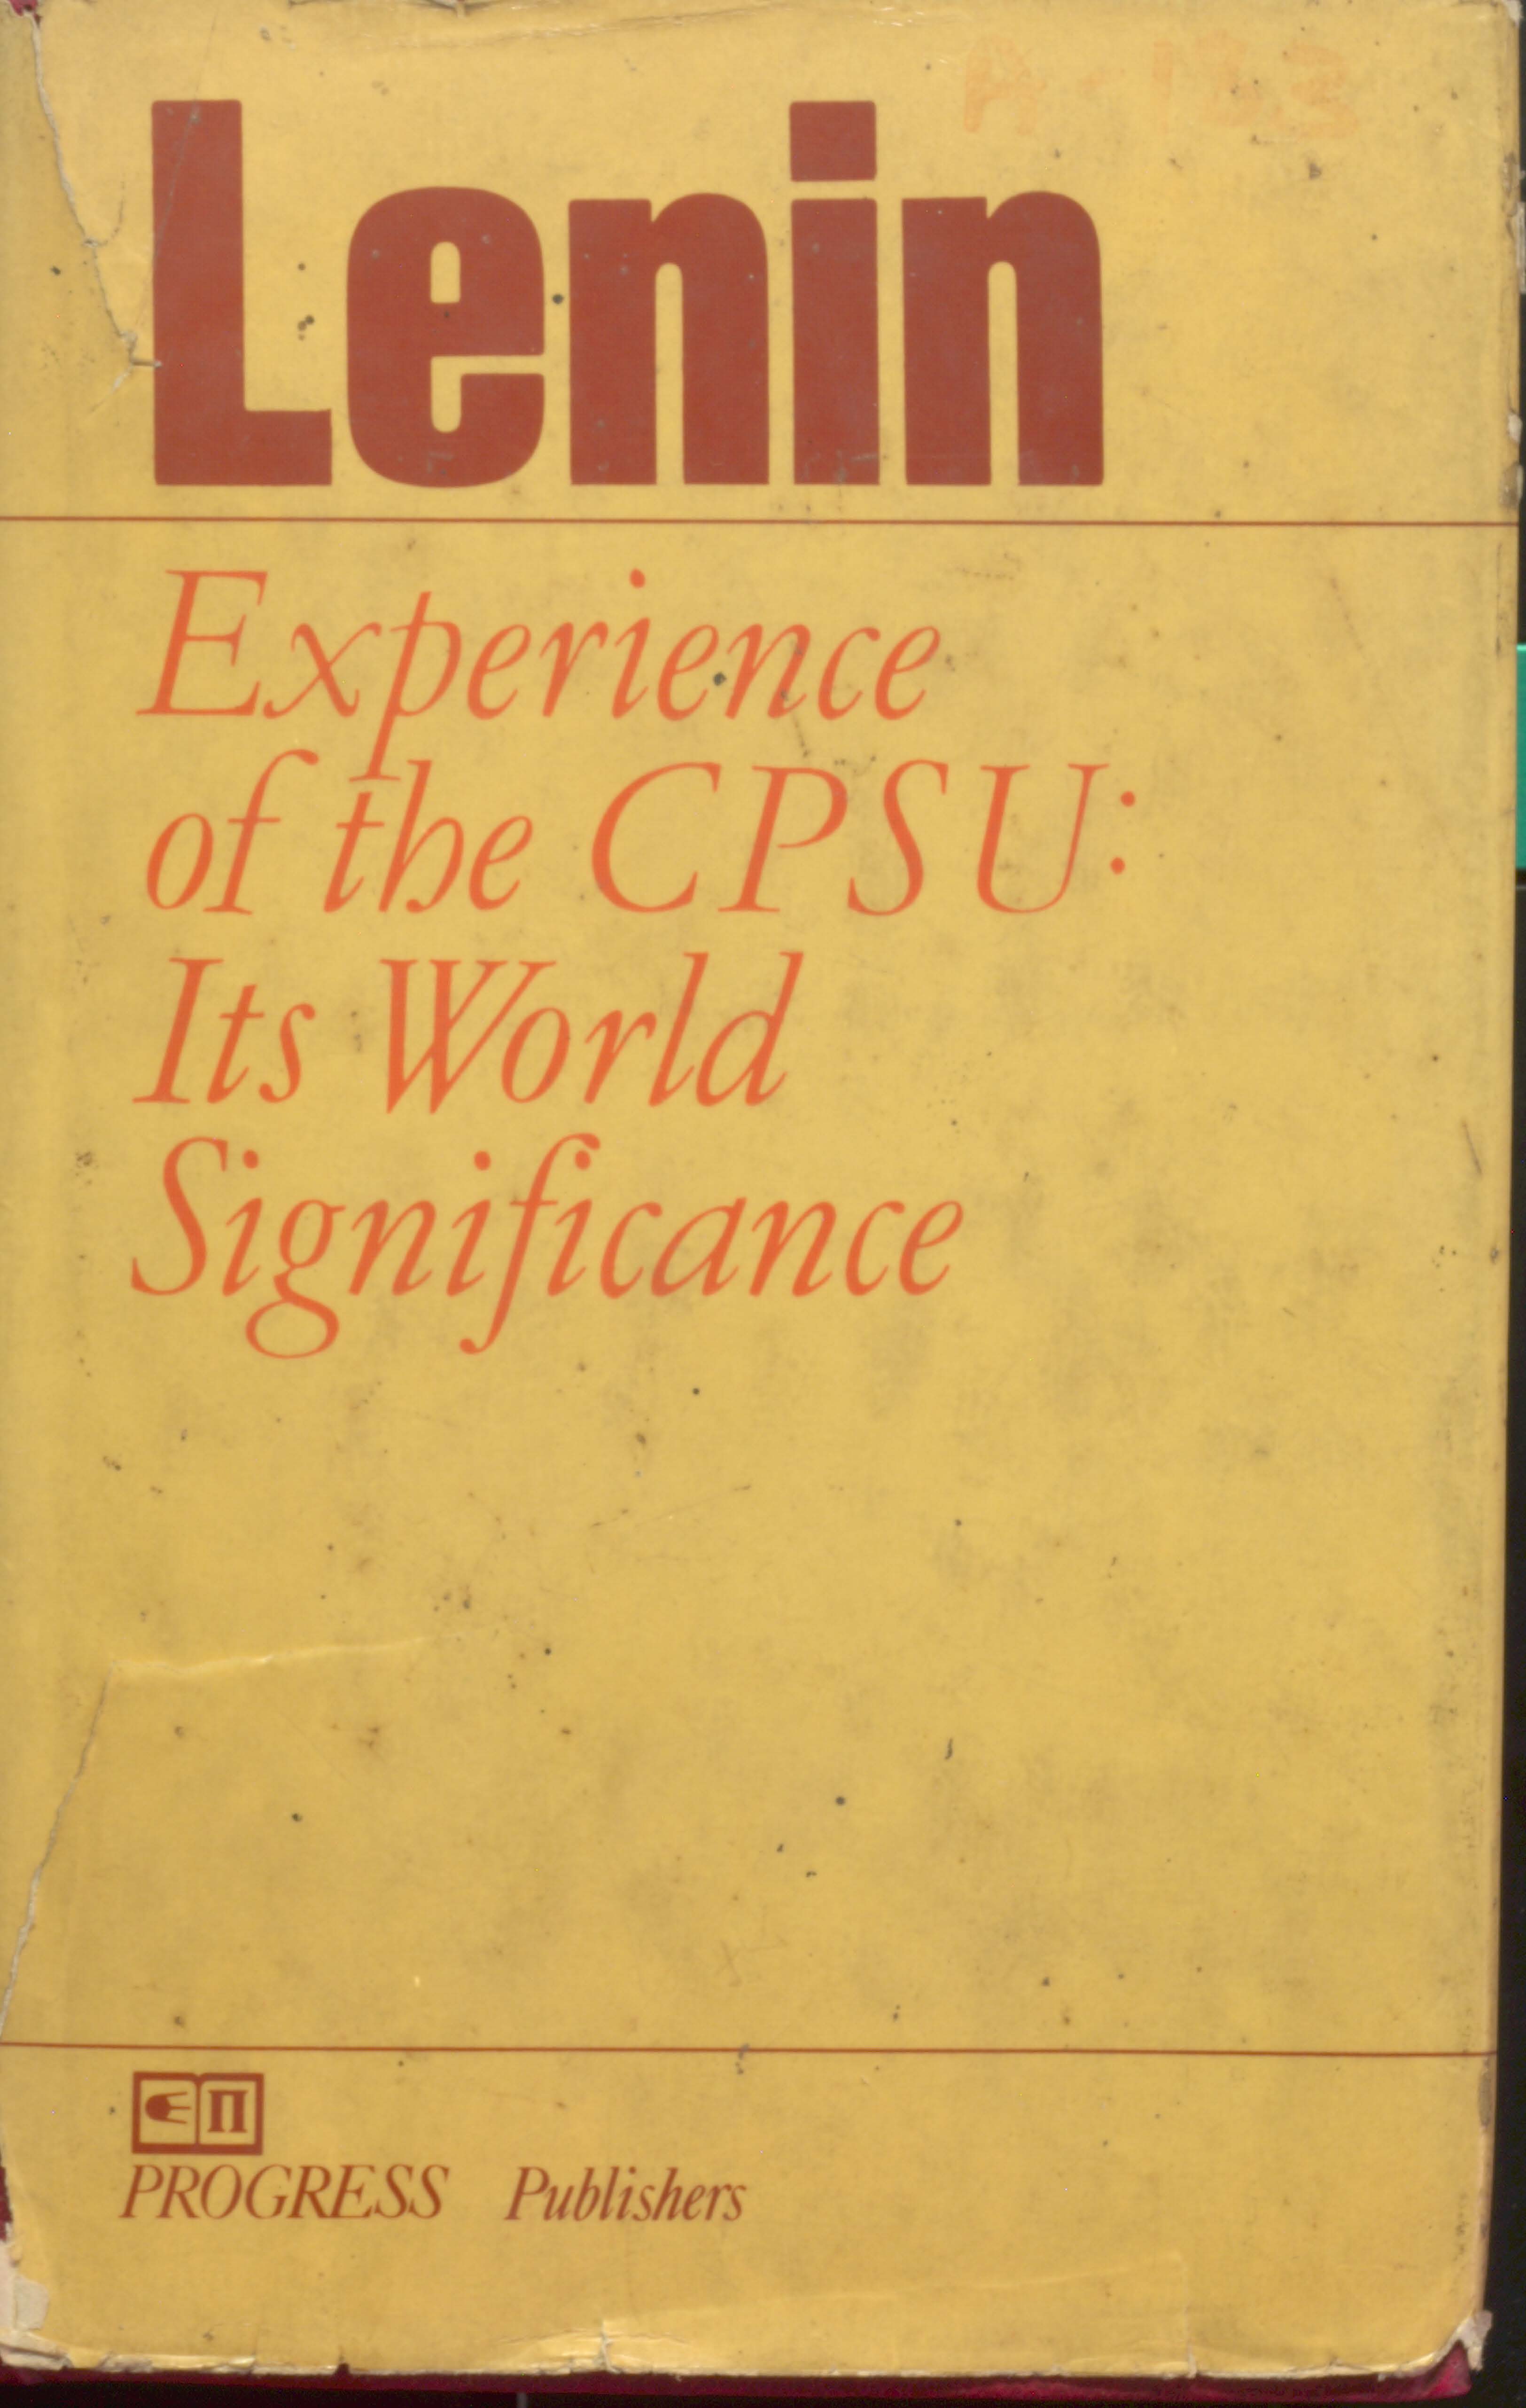 Lenin experience of the cpsu its world significance